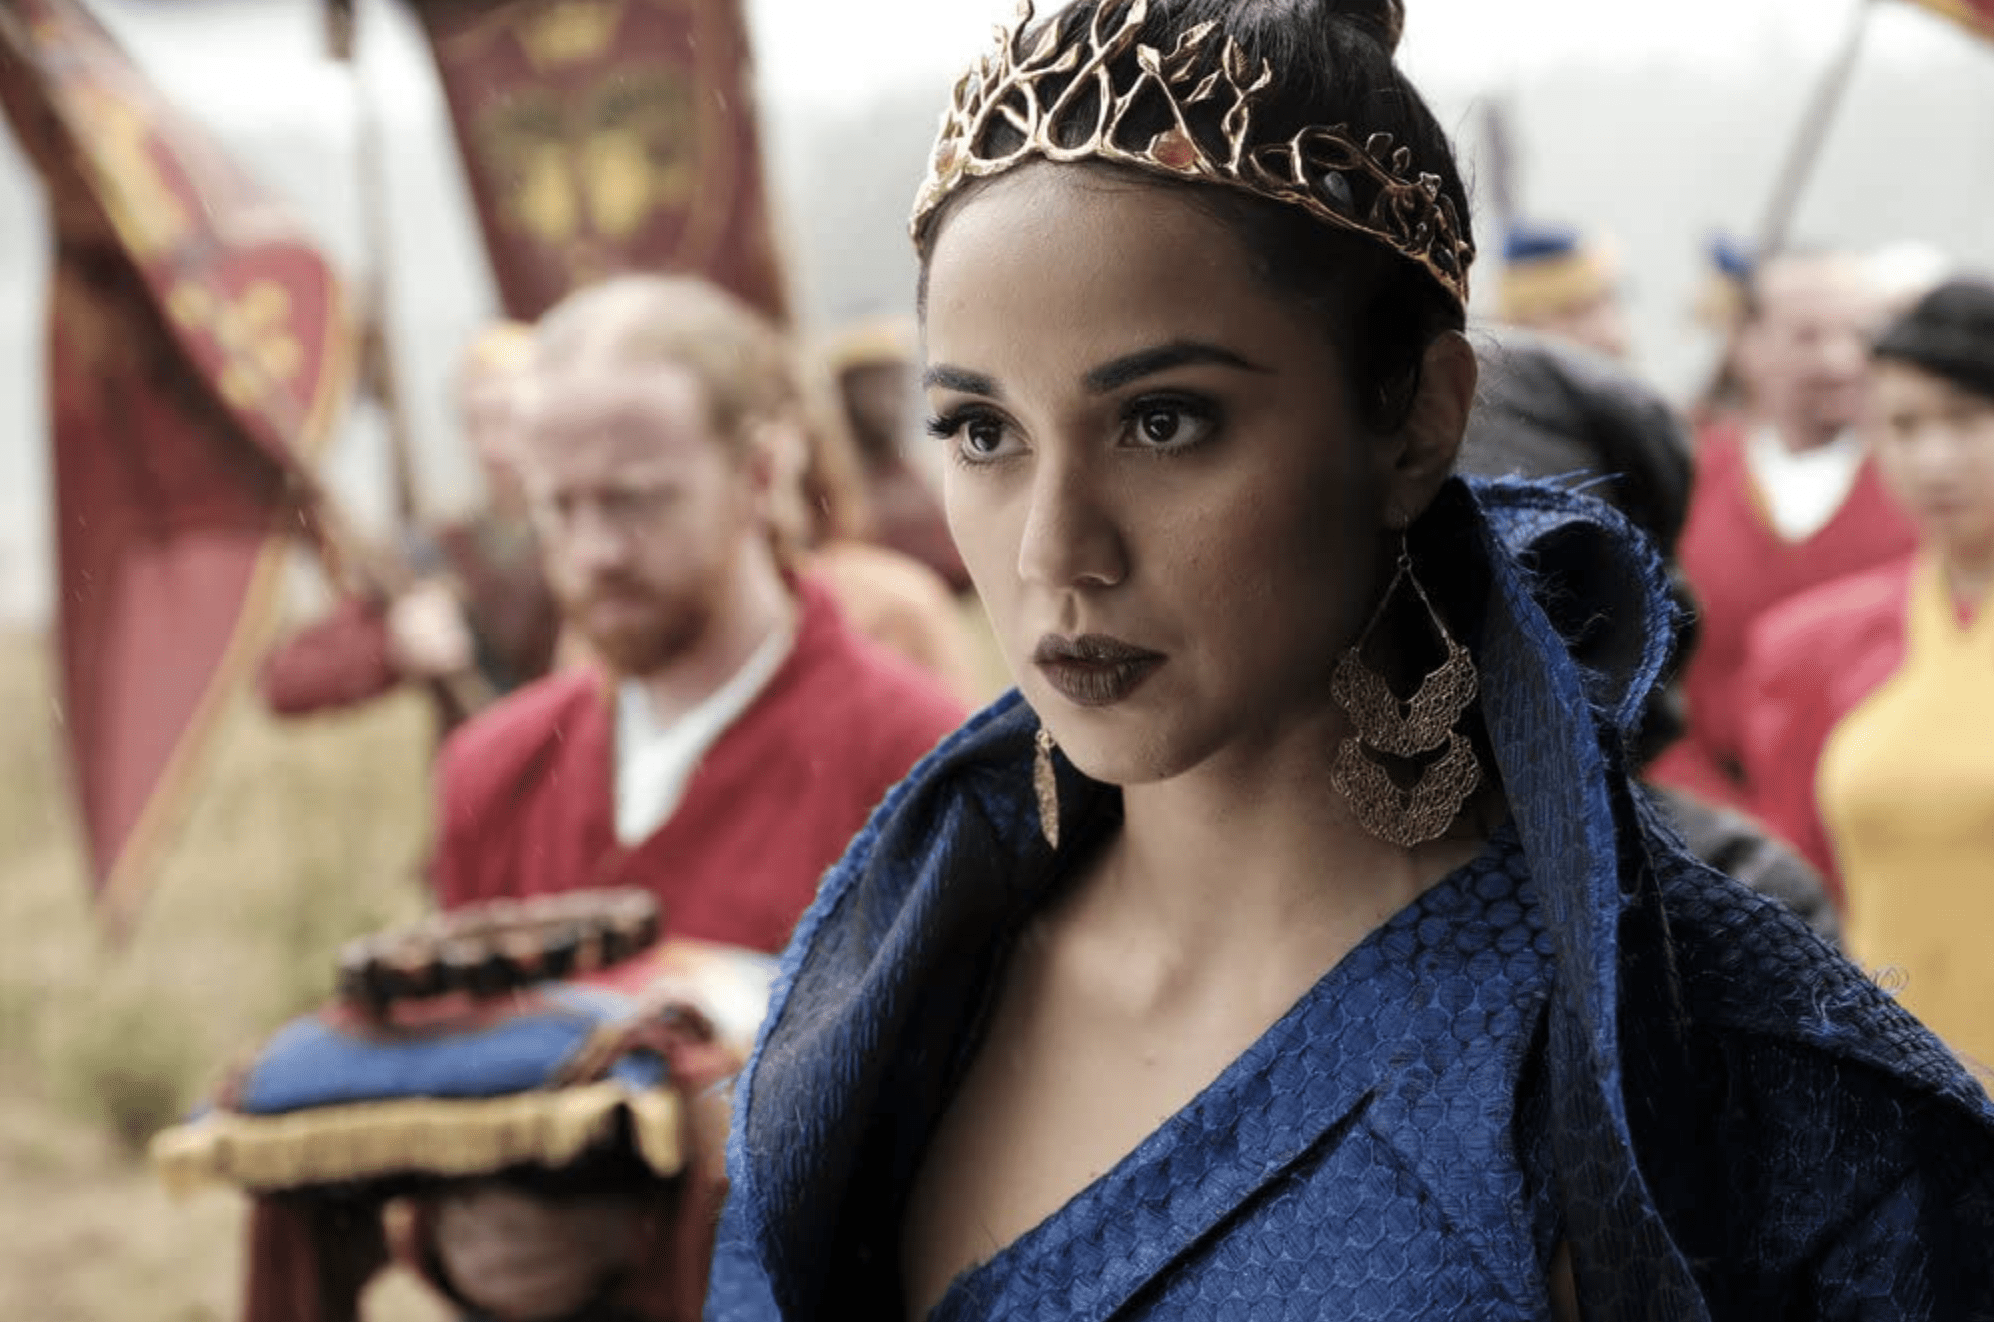 A woman wearing a crown commands attention in this image from Netflix